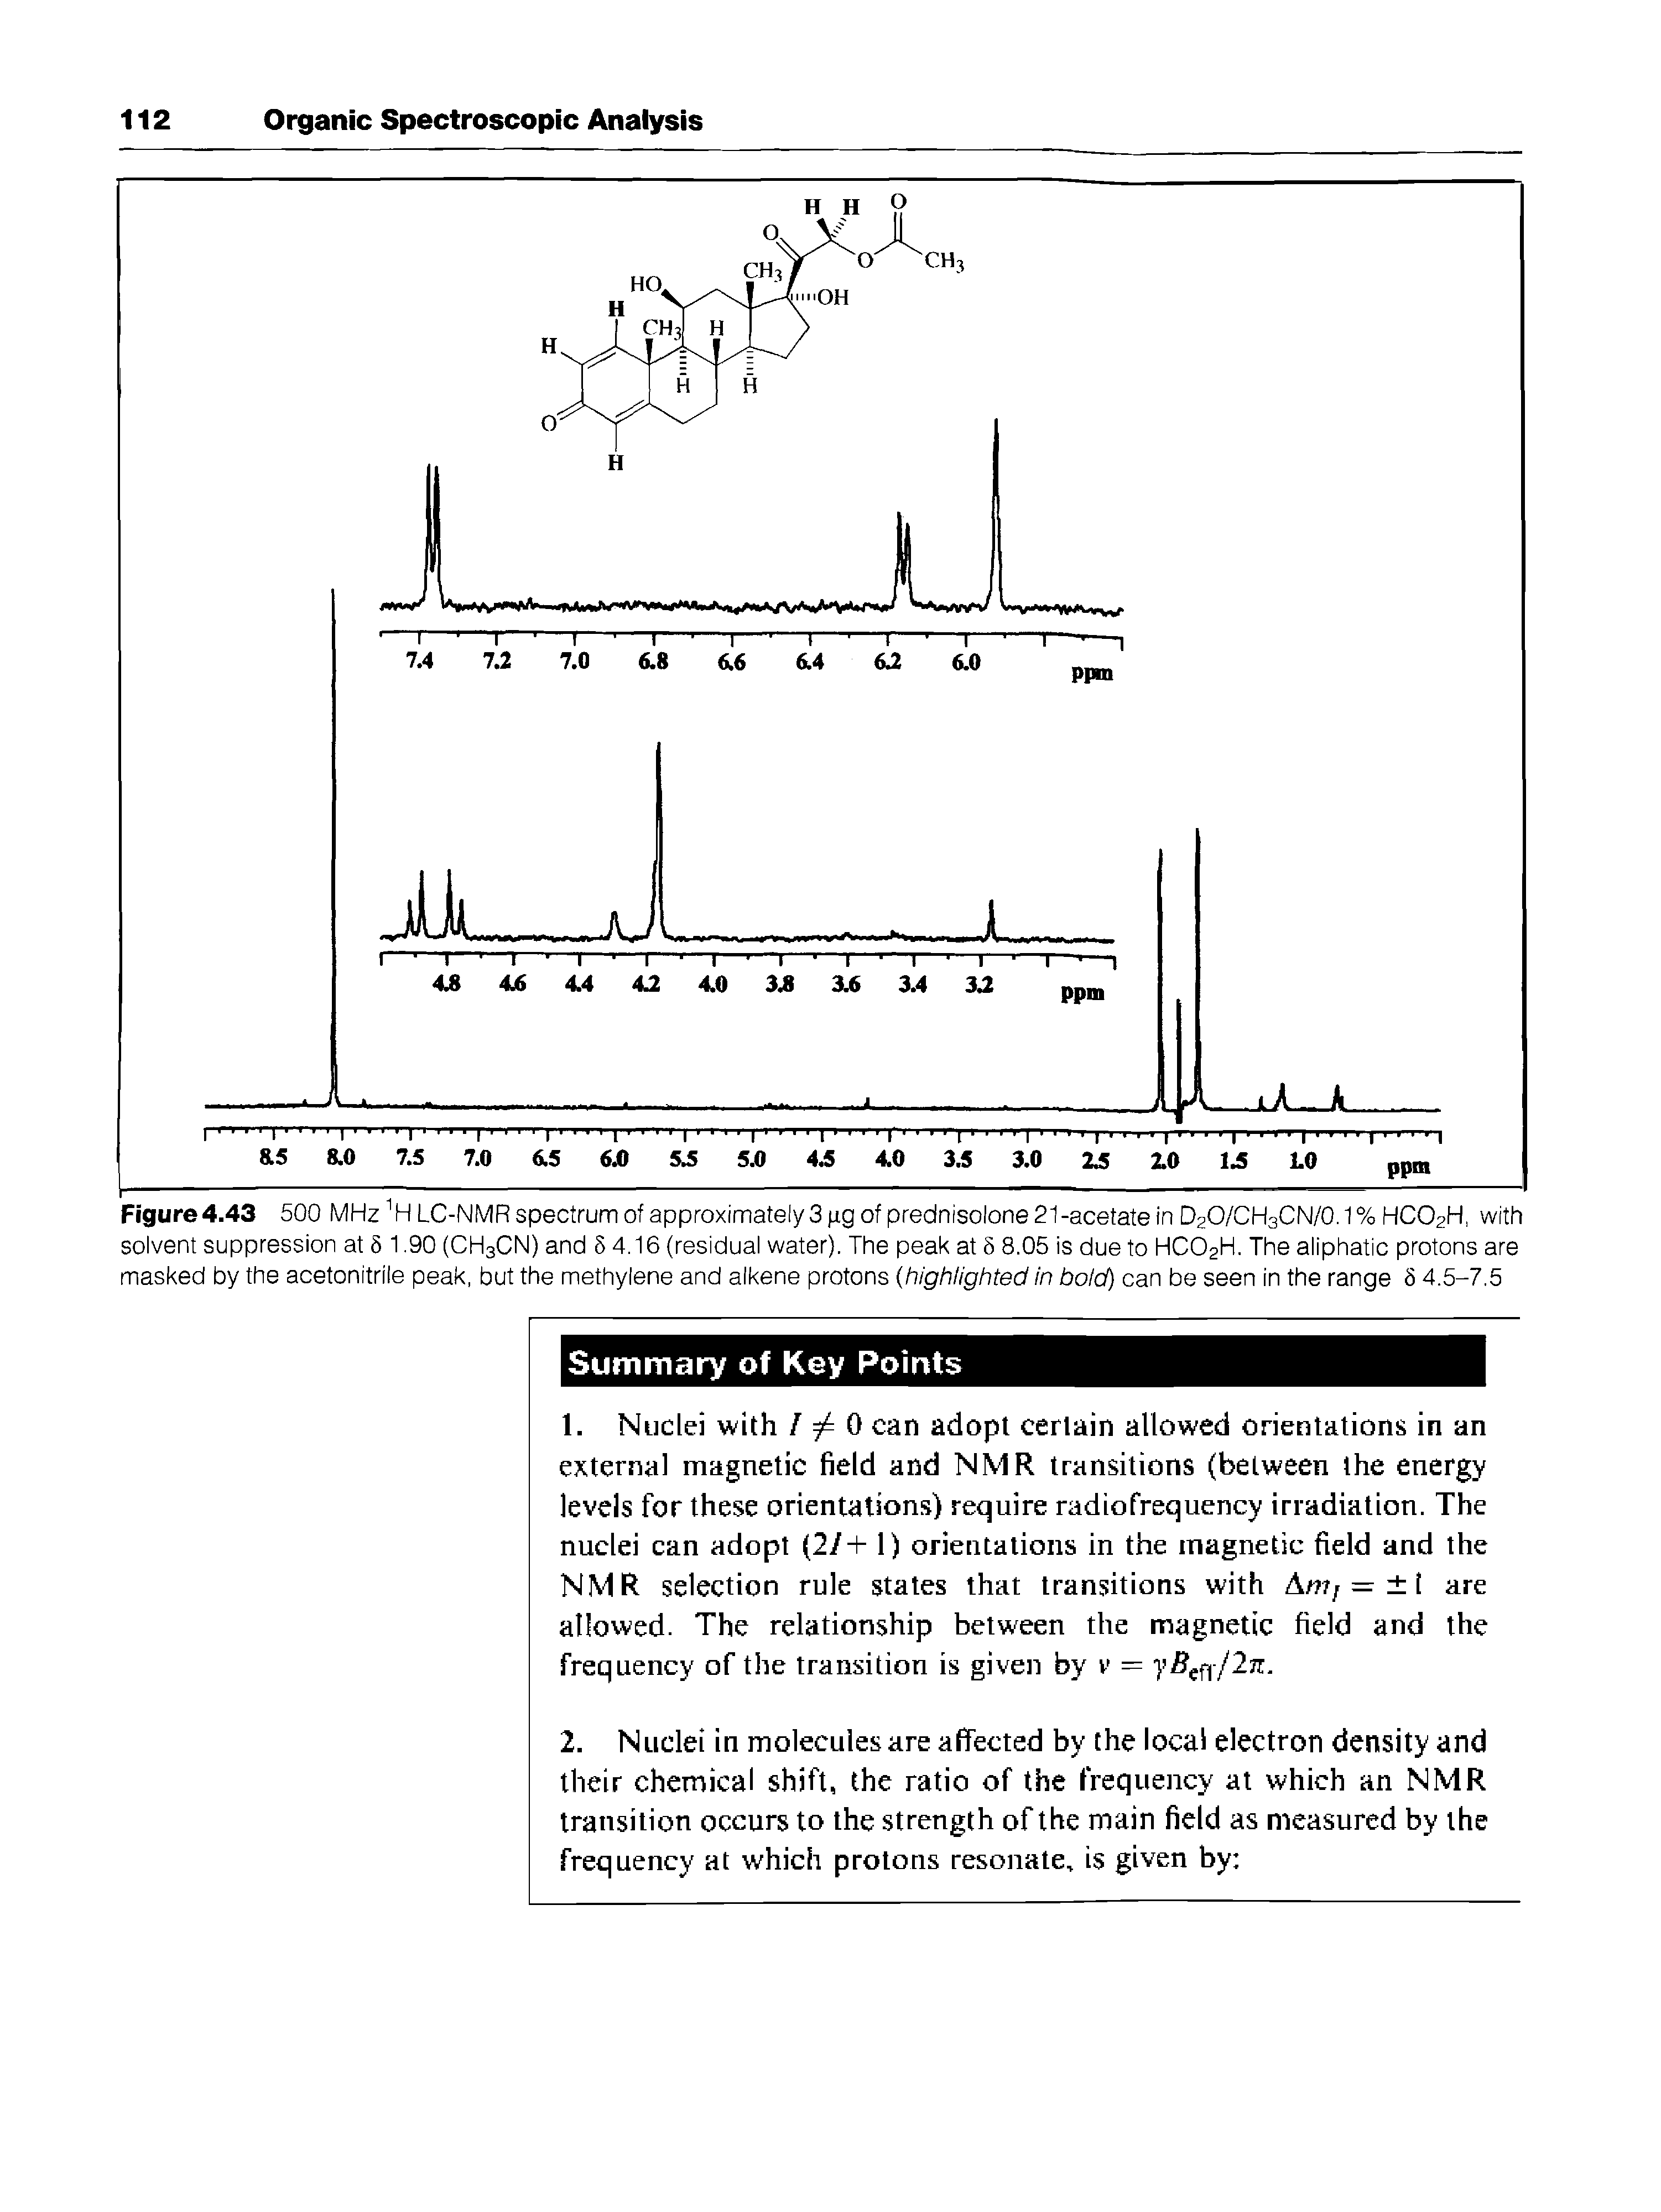 Figure 4.43 500 MHz LC-NMR spectrum of approximately 3 gg of prednisolone 21-acetate in D2O/CH3CN/0.1 % HCO2H, with solvent suppression at 5 1.90 (CH3CN) and 4.16 (residual water). The peak at 5 8.05 is due to HCO2H. The aliphatic protons are masked by the acetonitrile peak, but the methylene and alkene protons (highlighted in bold) can be seen in the range S 4.5-7.5...